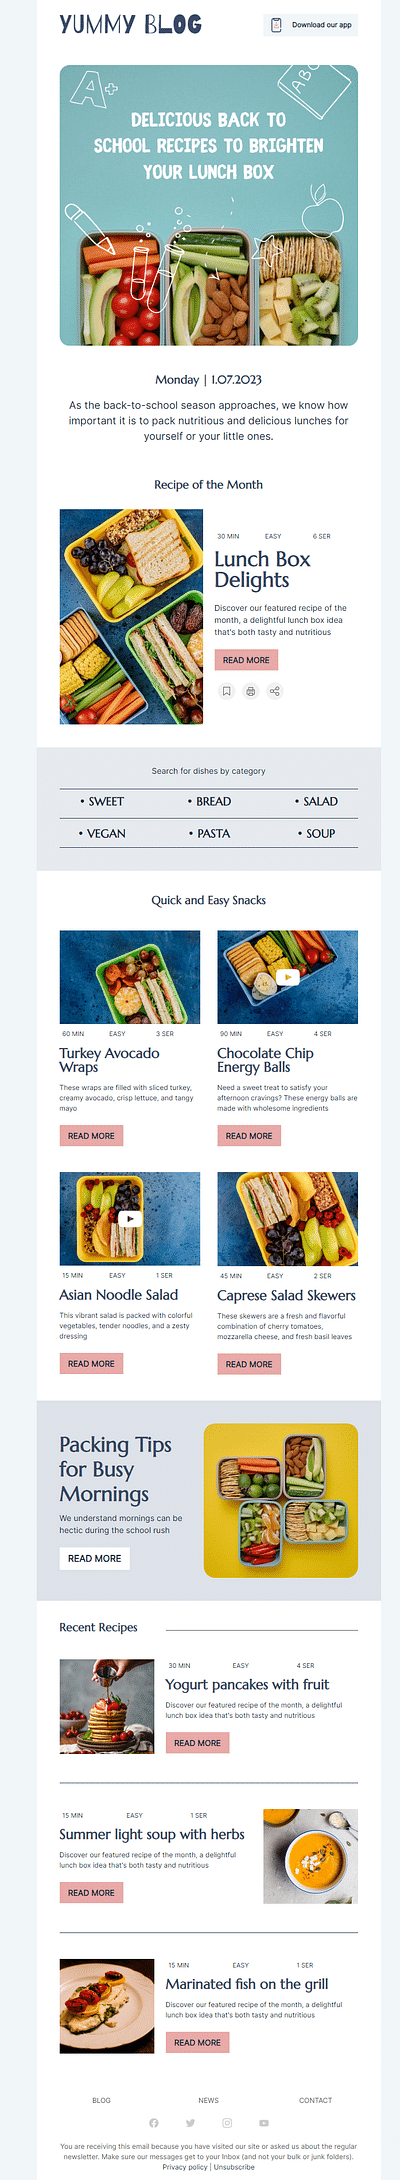 Yummy Blog email Template design - E-mail Marketing